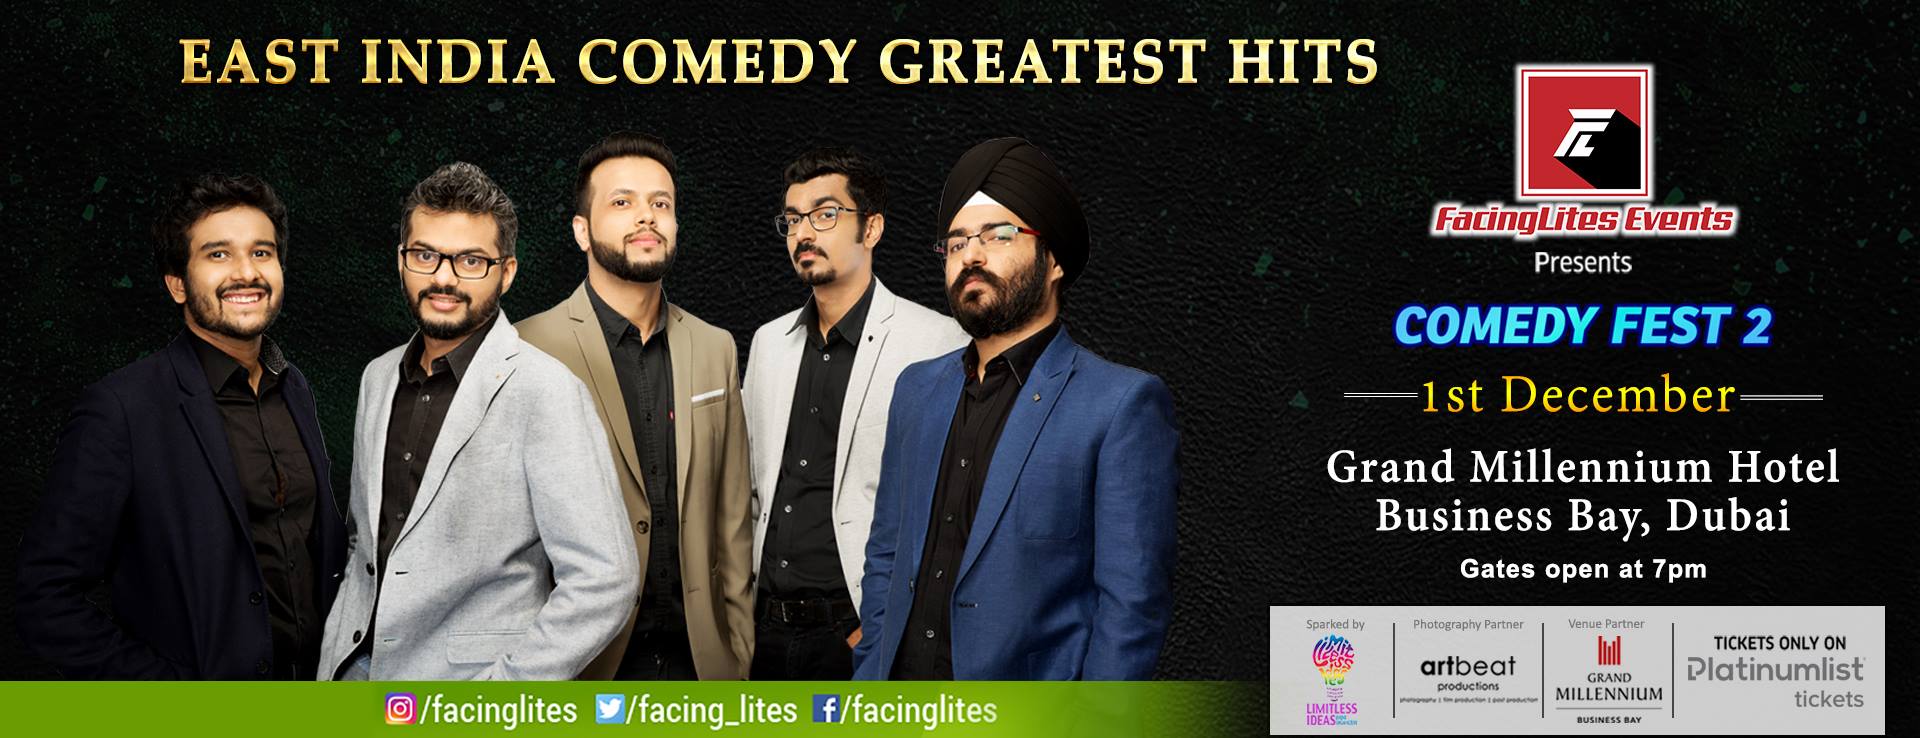 East India Comedy Greatest Hits - Coming Soon in UAE